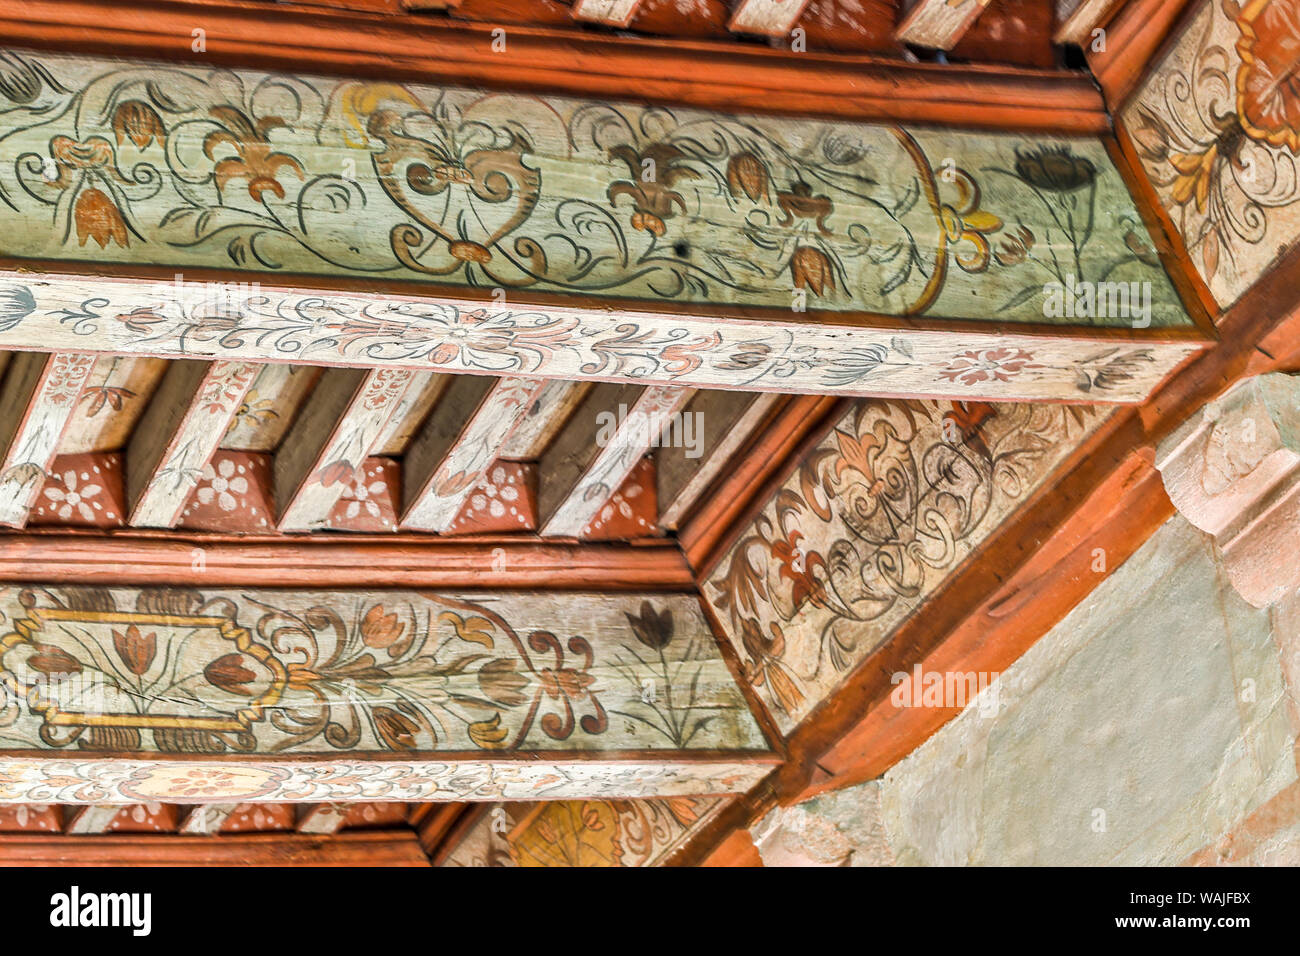 France, Chateau de Cenevieres. Decorated wooden beams. Stock Photo